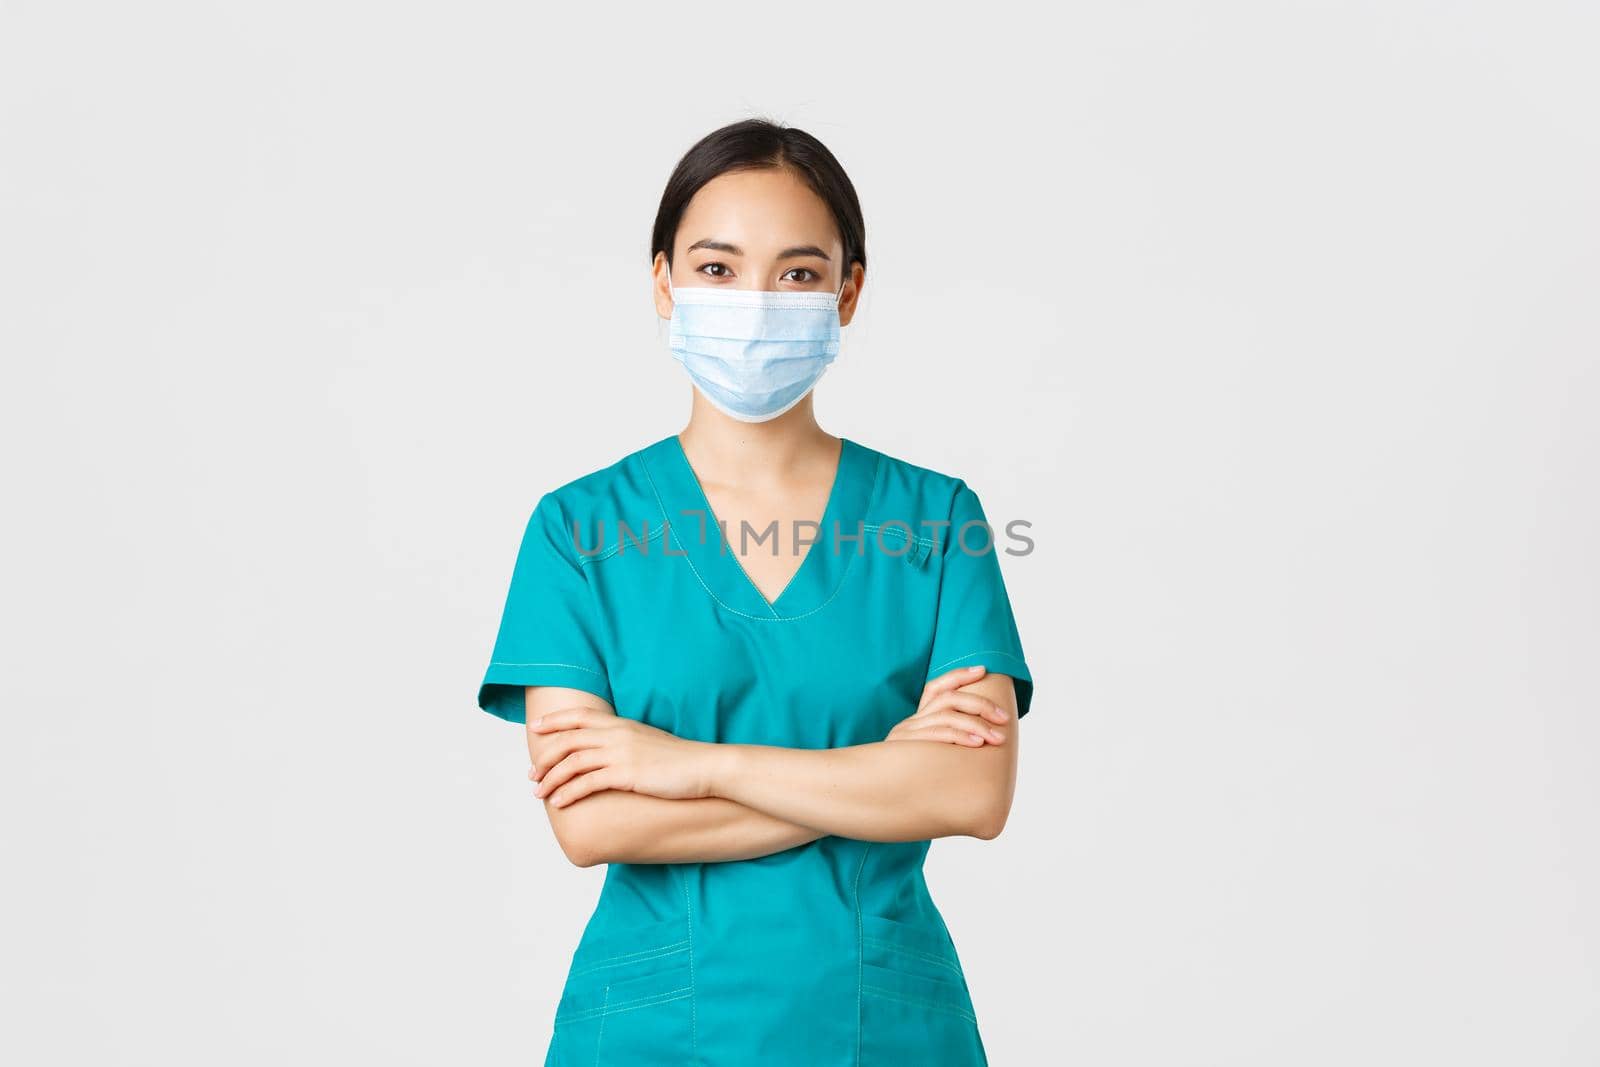 Covid-19, coronavirus disease, healthcare workers concept. Smiling confident asian female doctor, physician making checkup, wearing scrubs and medical mask, looking determined, white background.